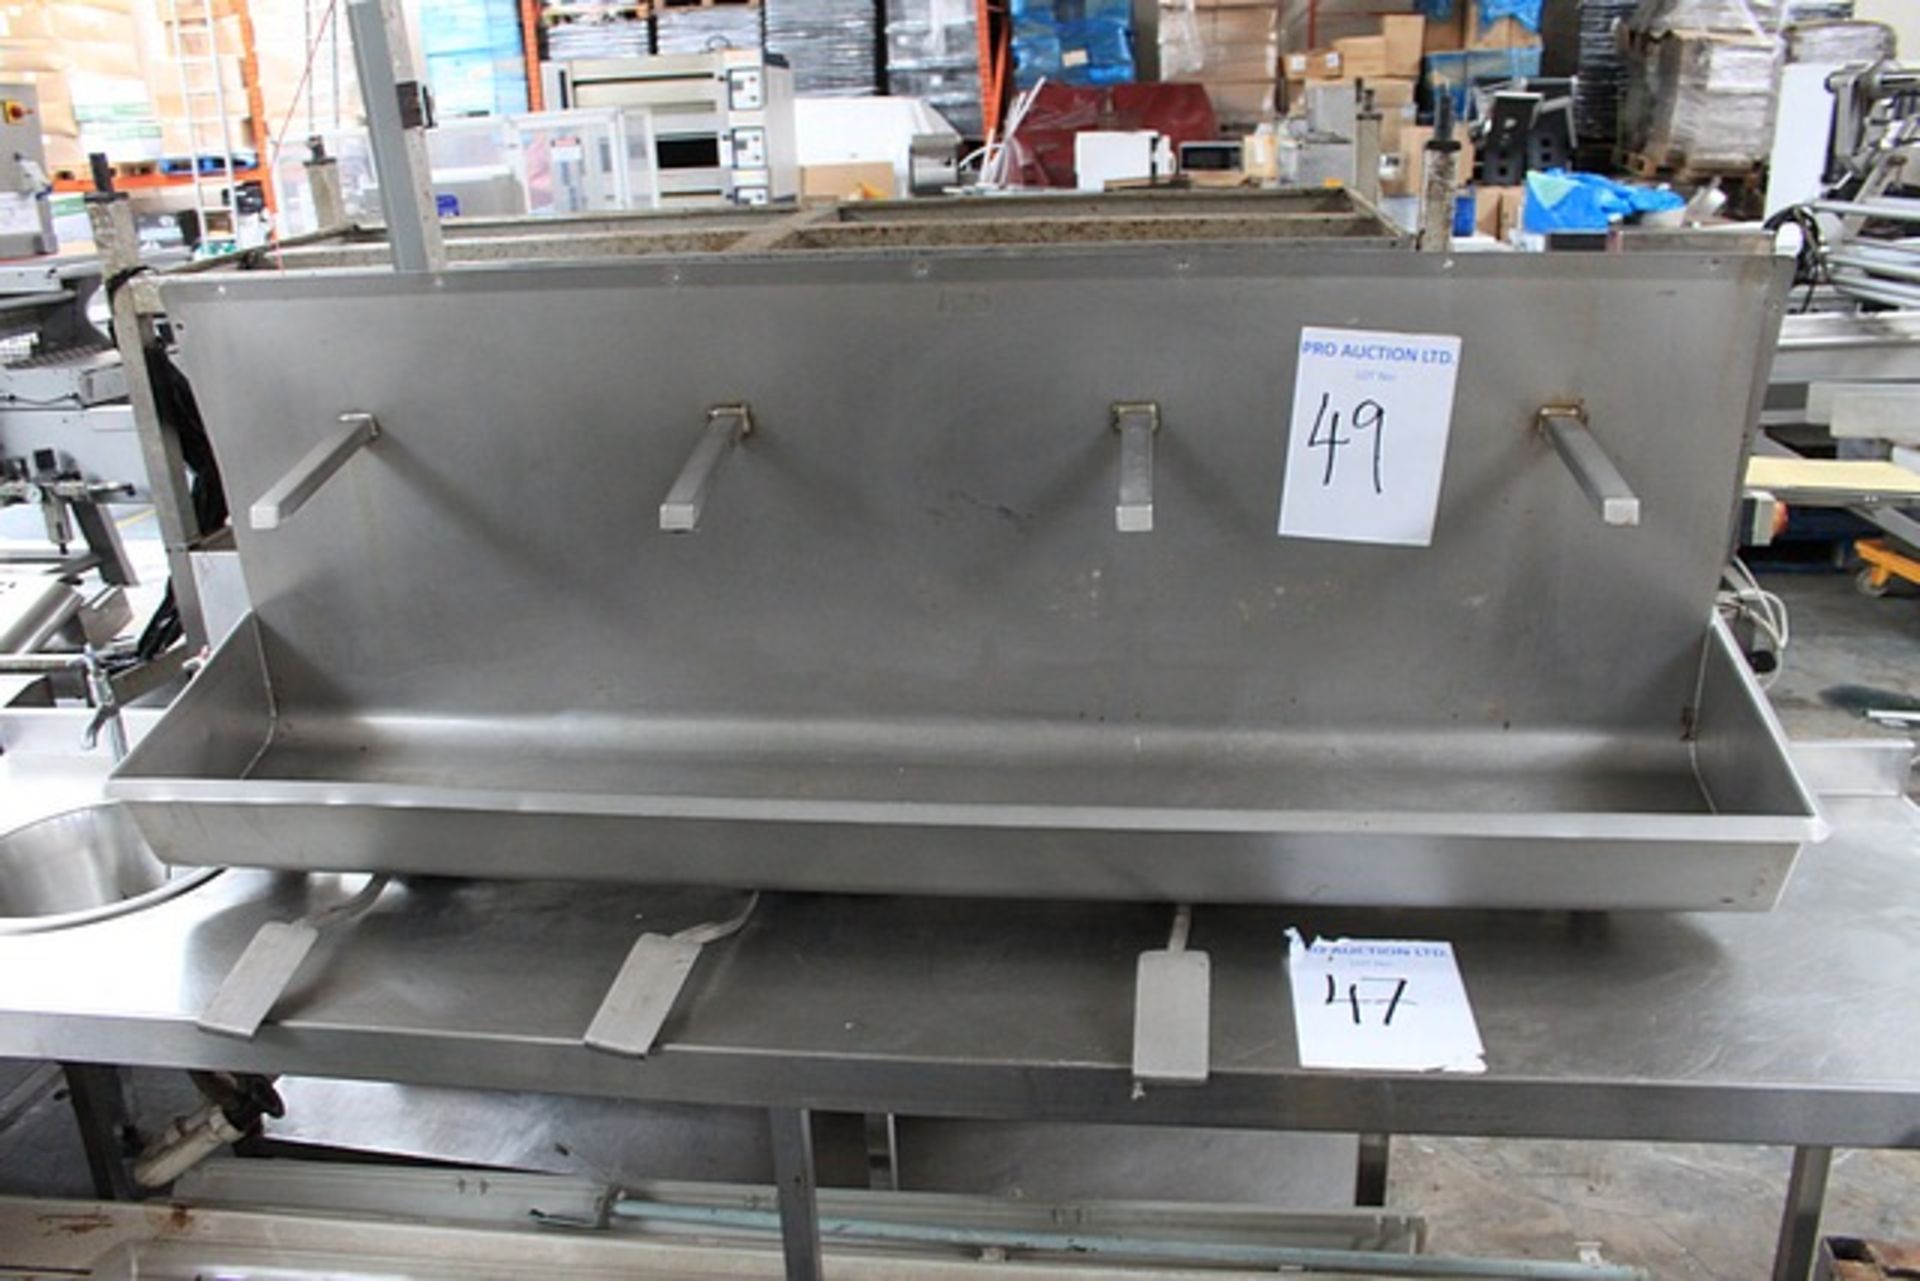 Stainless steel 4 station knee operated sink